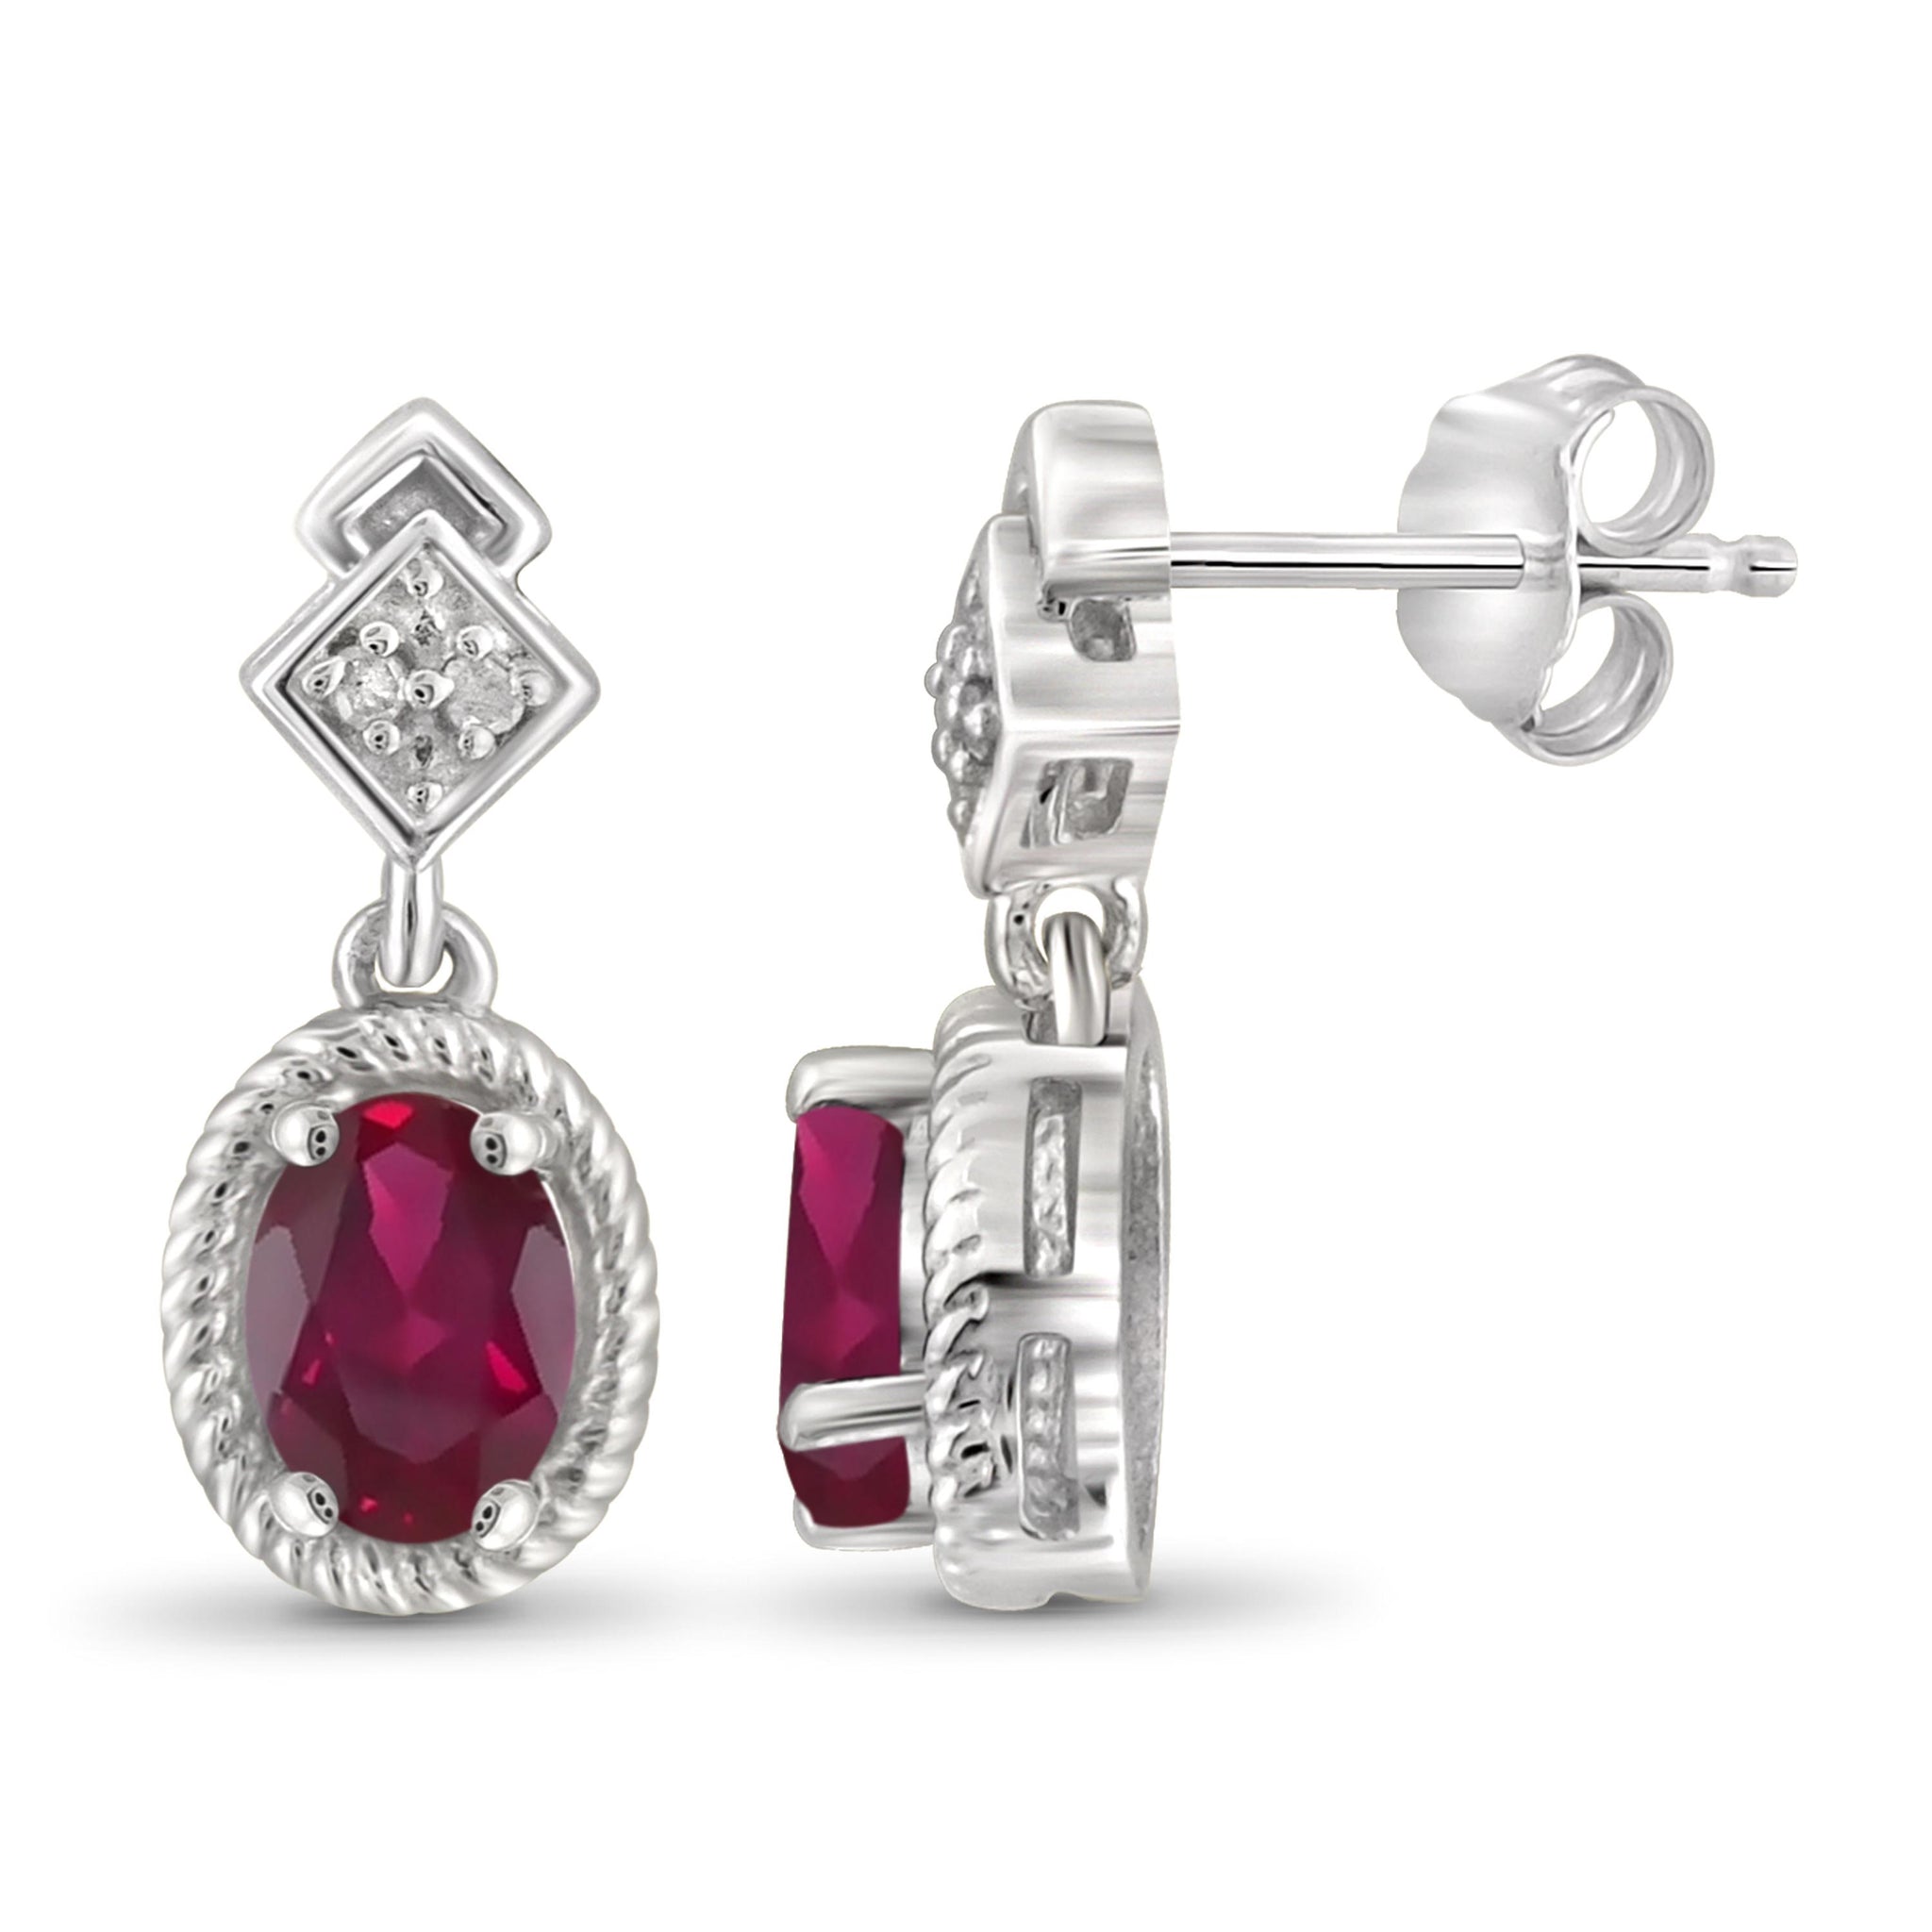 JewelonFire 0.90 Carat T.G.W. Ruby and White Diamond Accent Sterling Silver Earrings - Assorted Colors